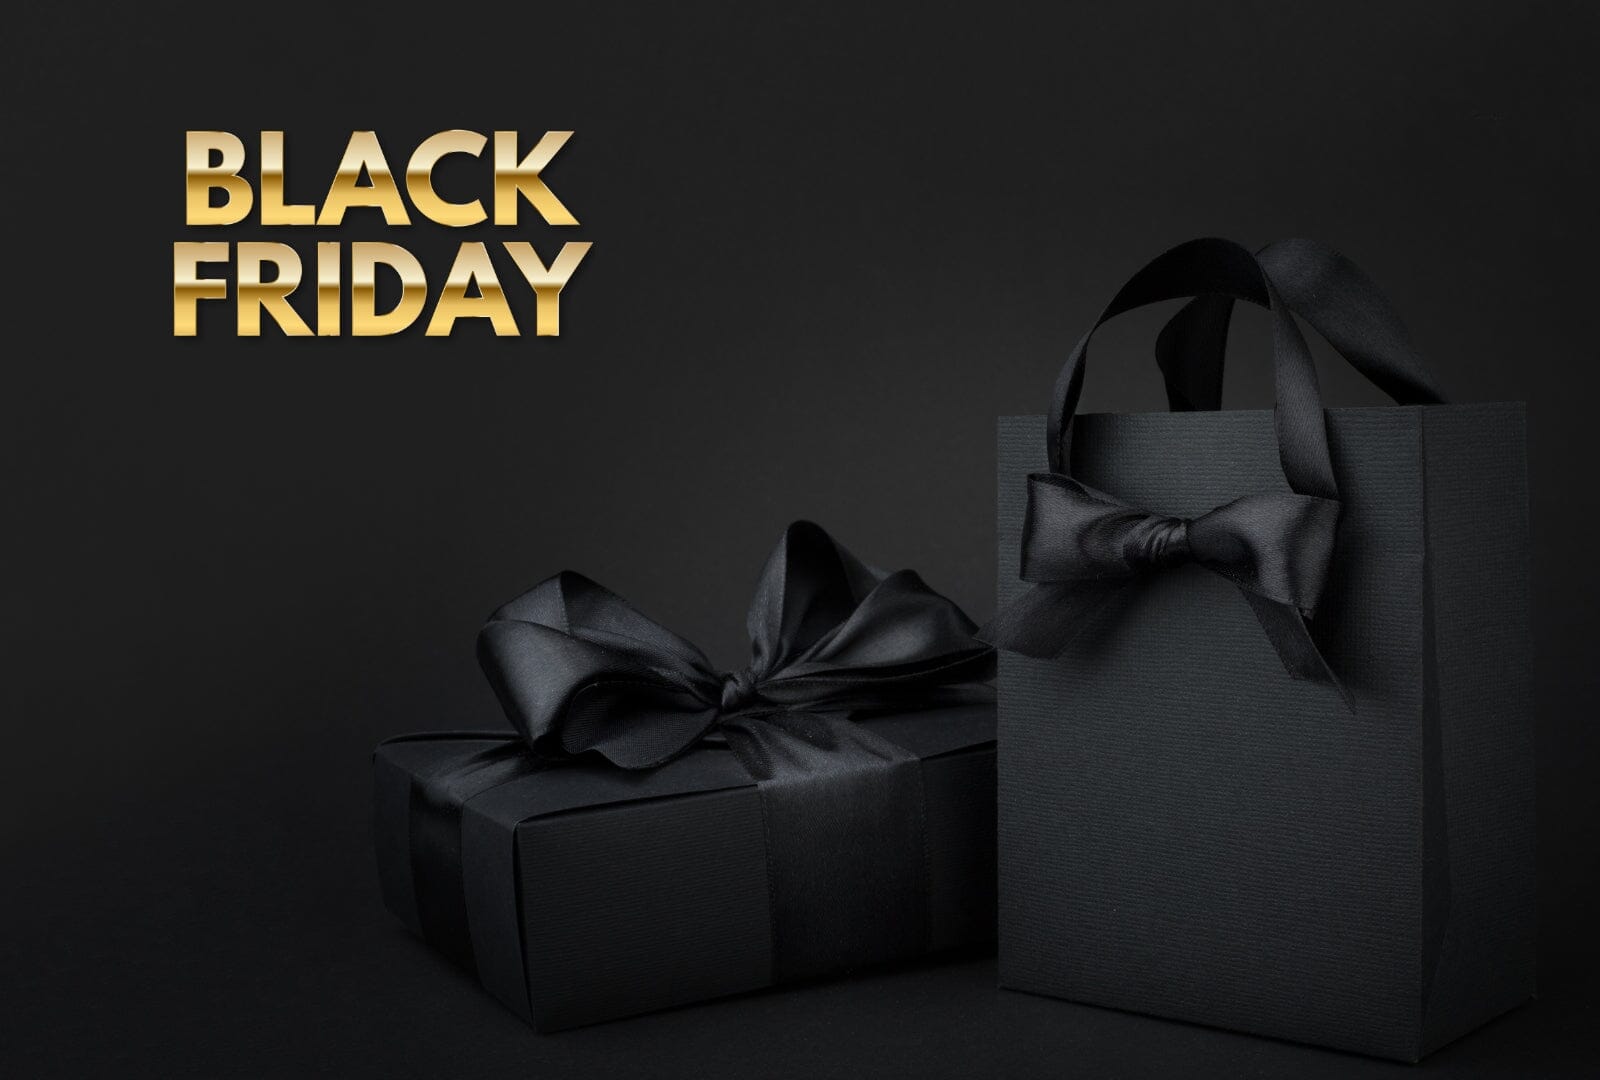 Maximise Your SAVINGS This Black Friday!